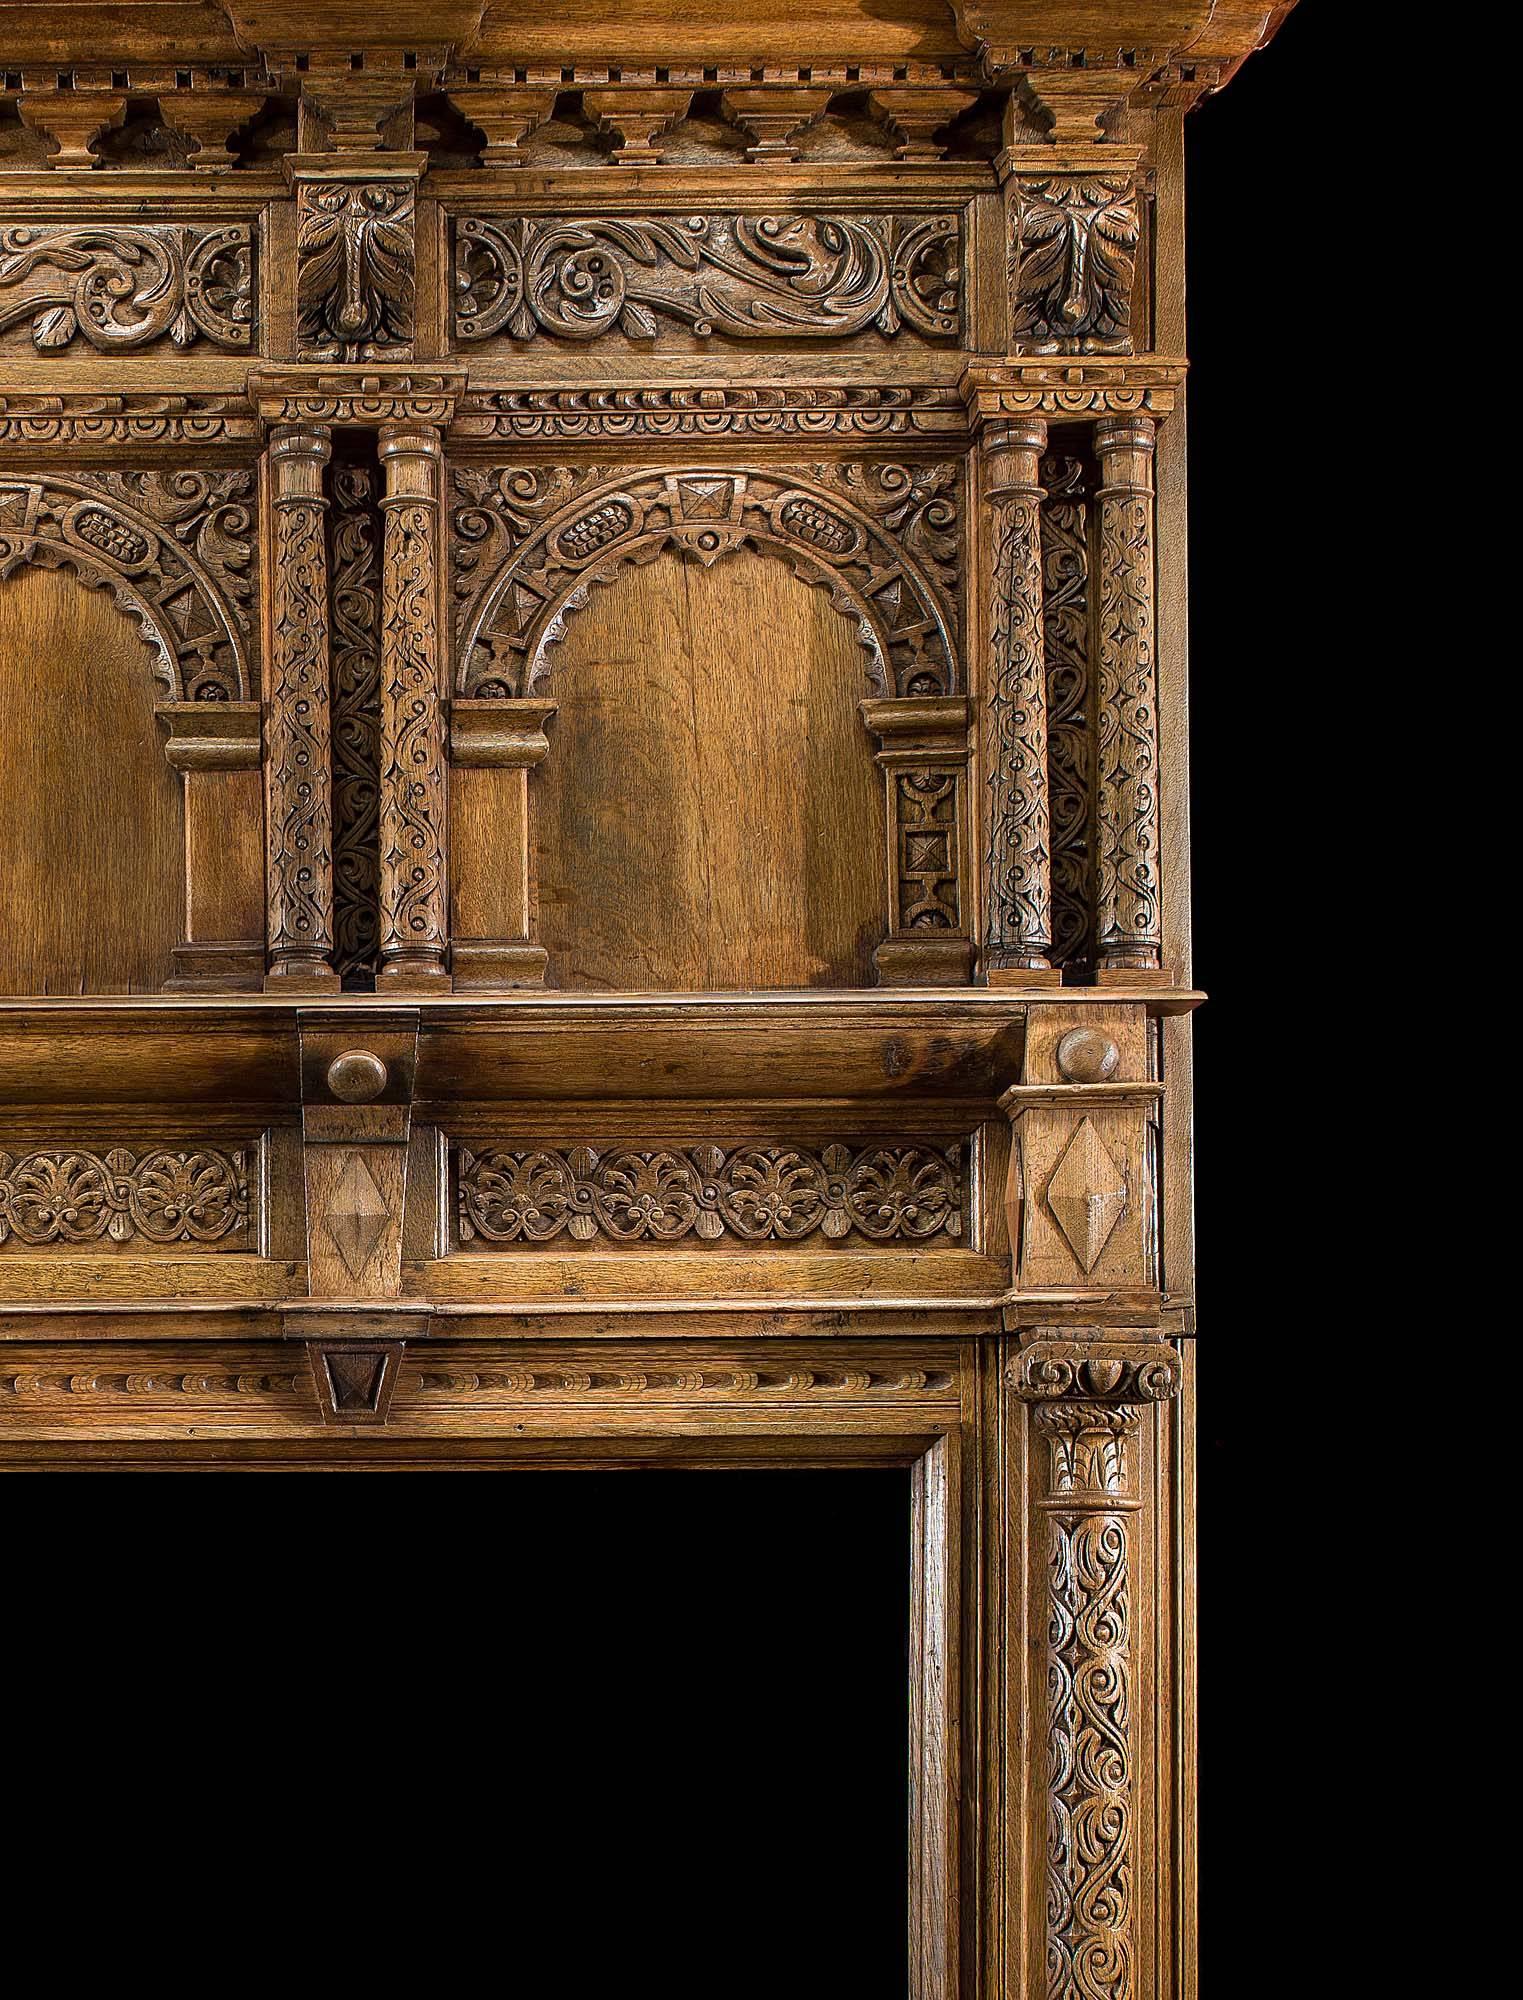 A large carved oak Jacobean fireplace surround and overmantel. The high breakfront shelf rests above bead and reel and bracket supports. The carved overmantel is embellished with a pair of scrolled foliate panels beneath which are decoratively